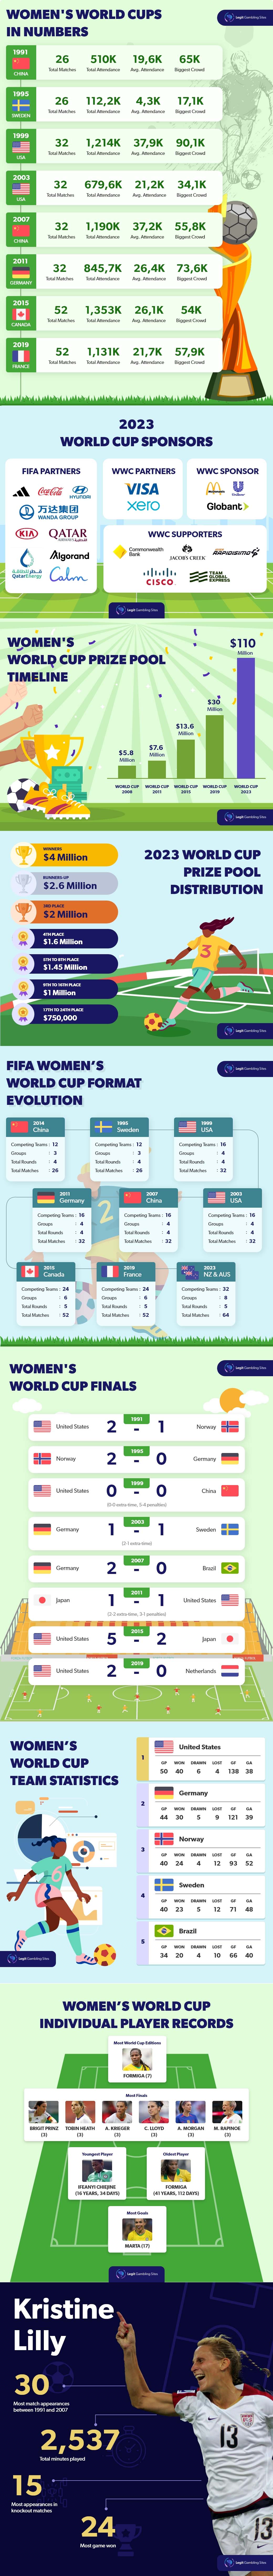 Women's World Cup Stats and Records